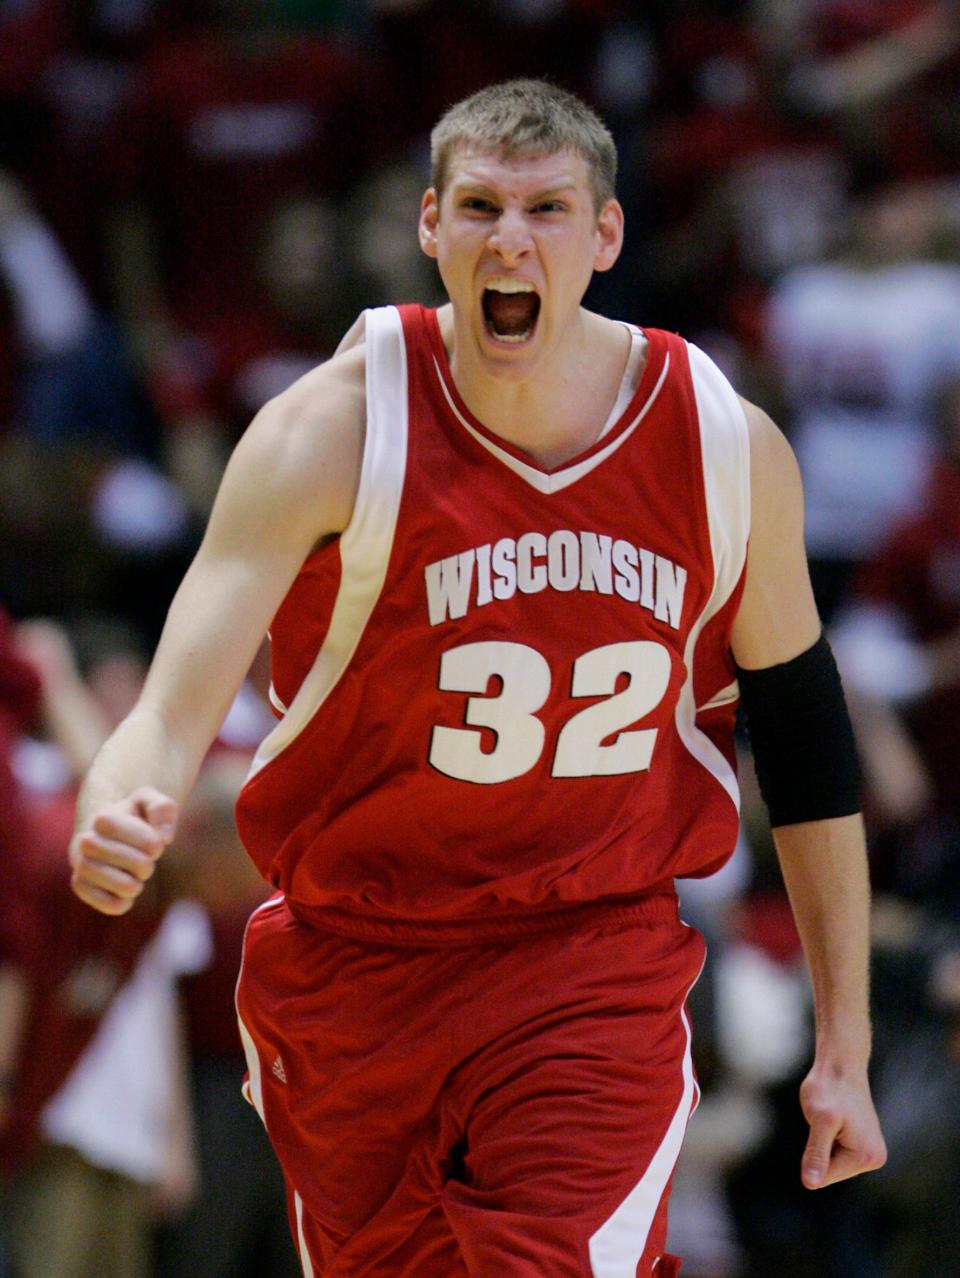 Brian Butch played with the Badgers from 2004-08.